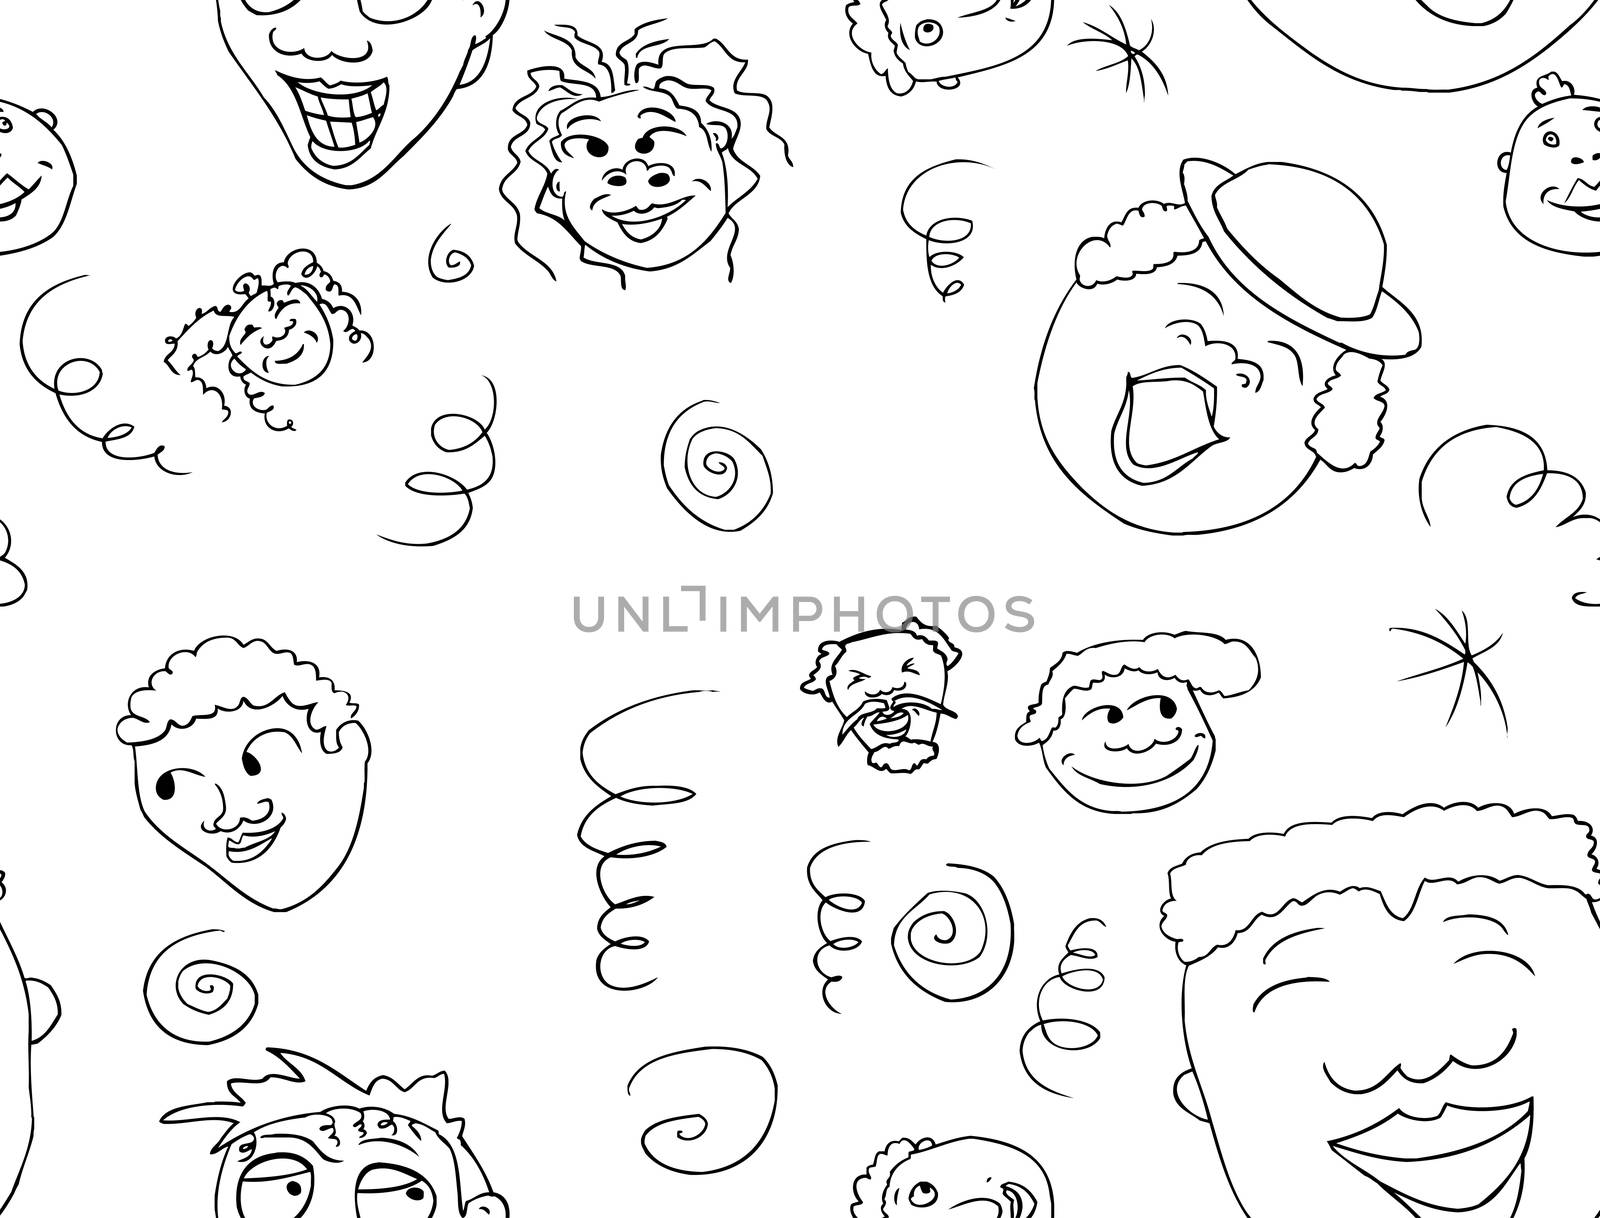 Outlined Pattern of Happy People by TheBlackRhino